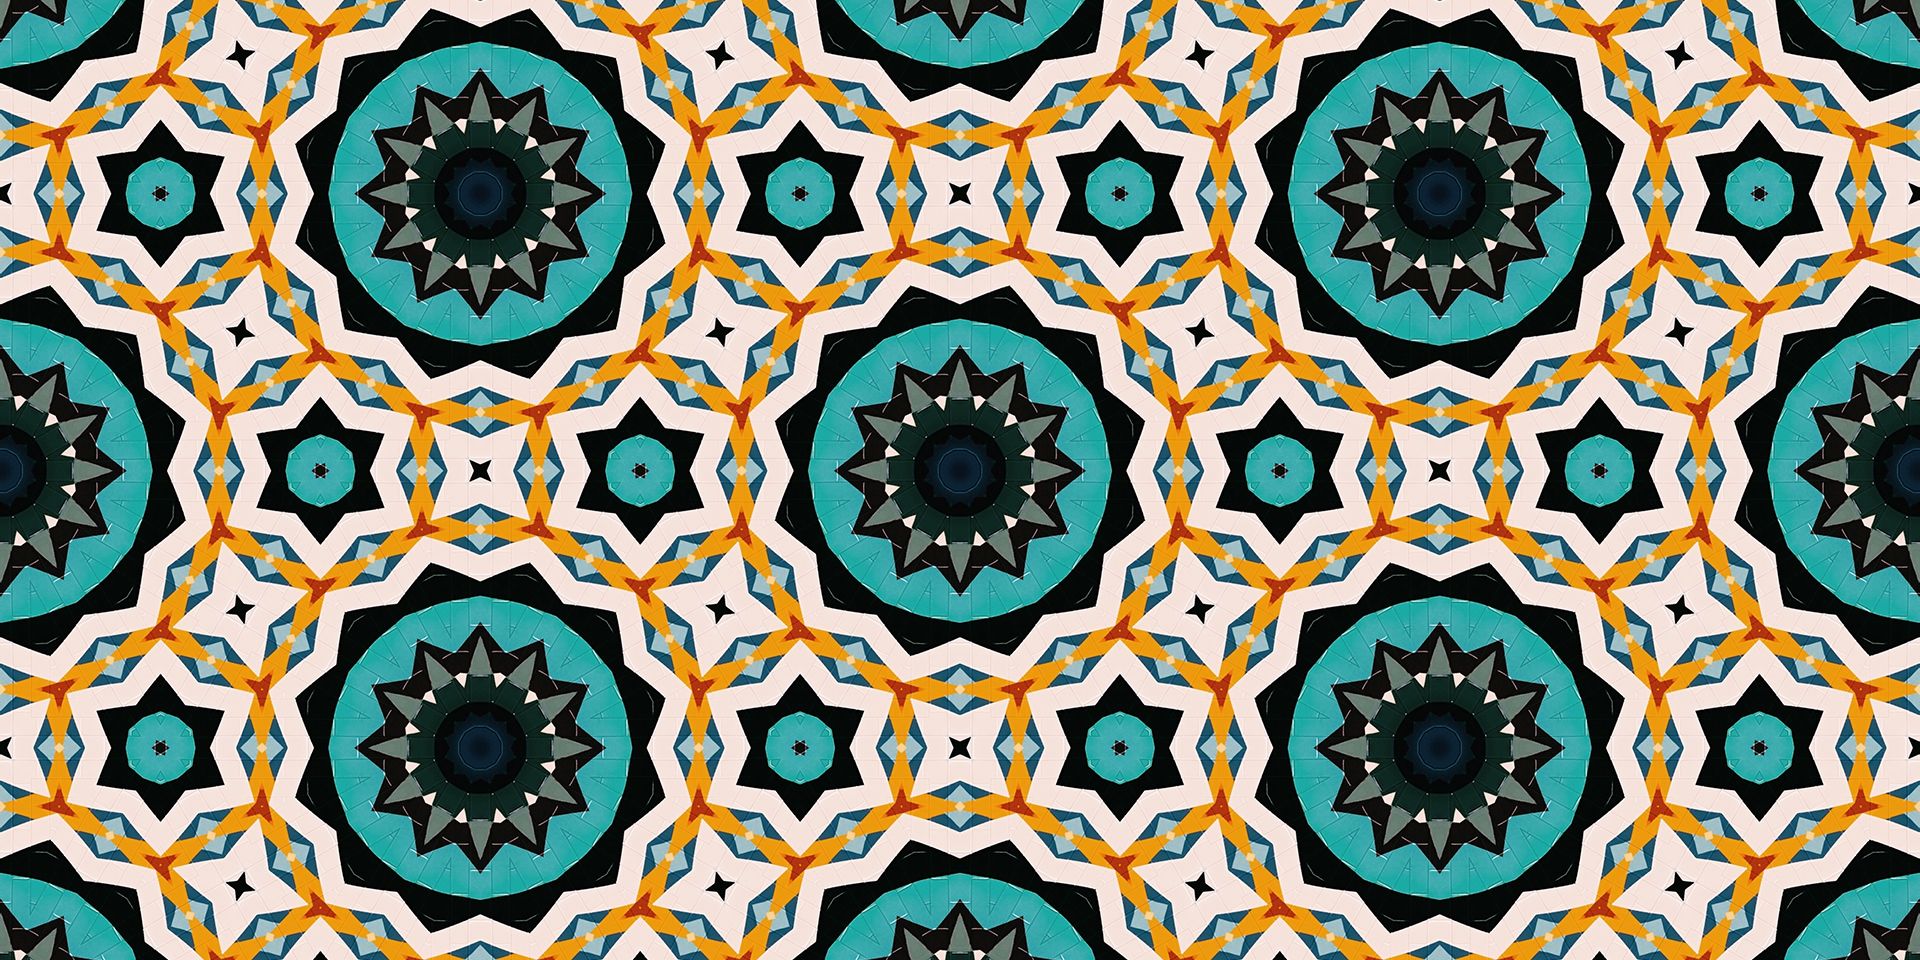 NEW TILING → Persian Star (From Islamic Art to Modern Design)